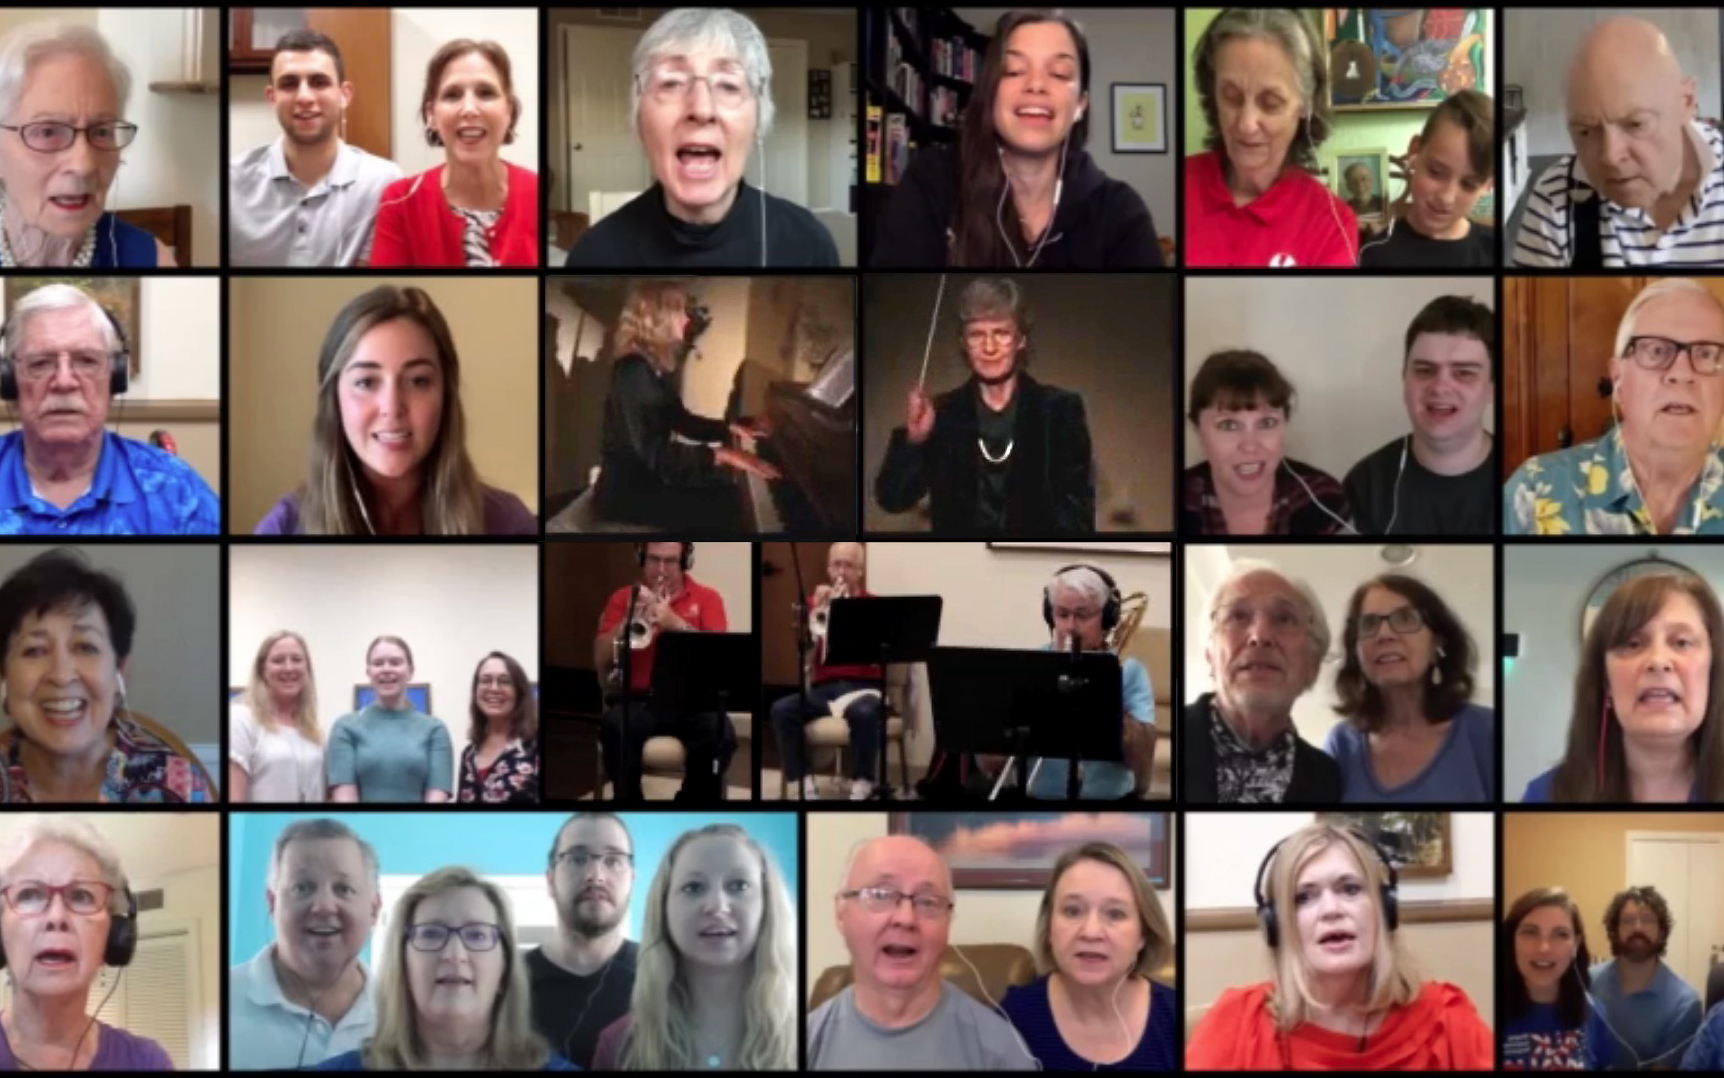 A screenshot of many people singing together virtually on screen.